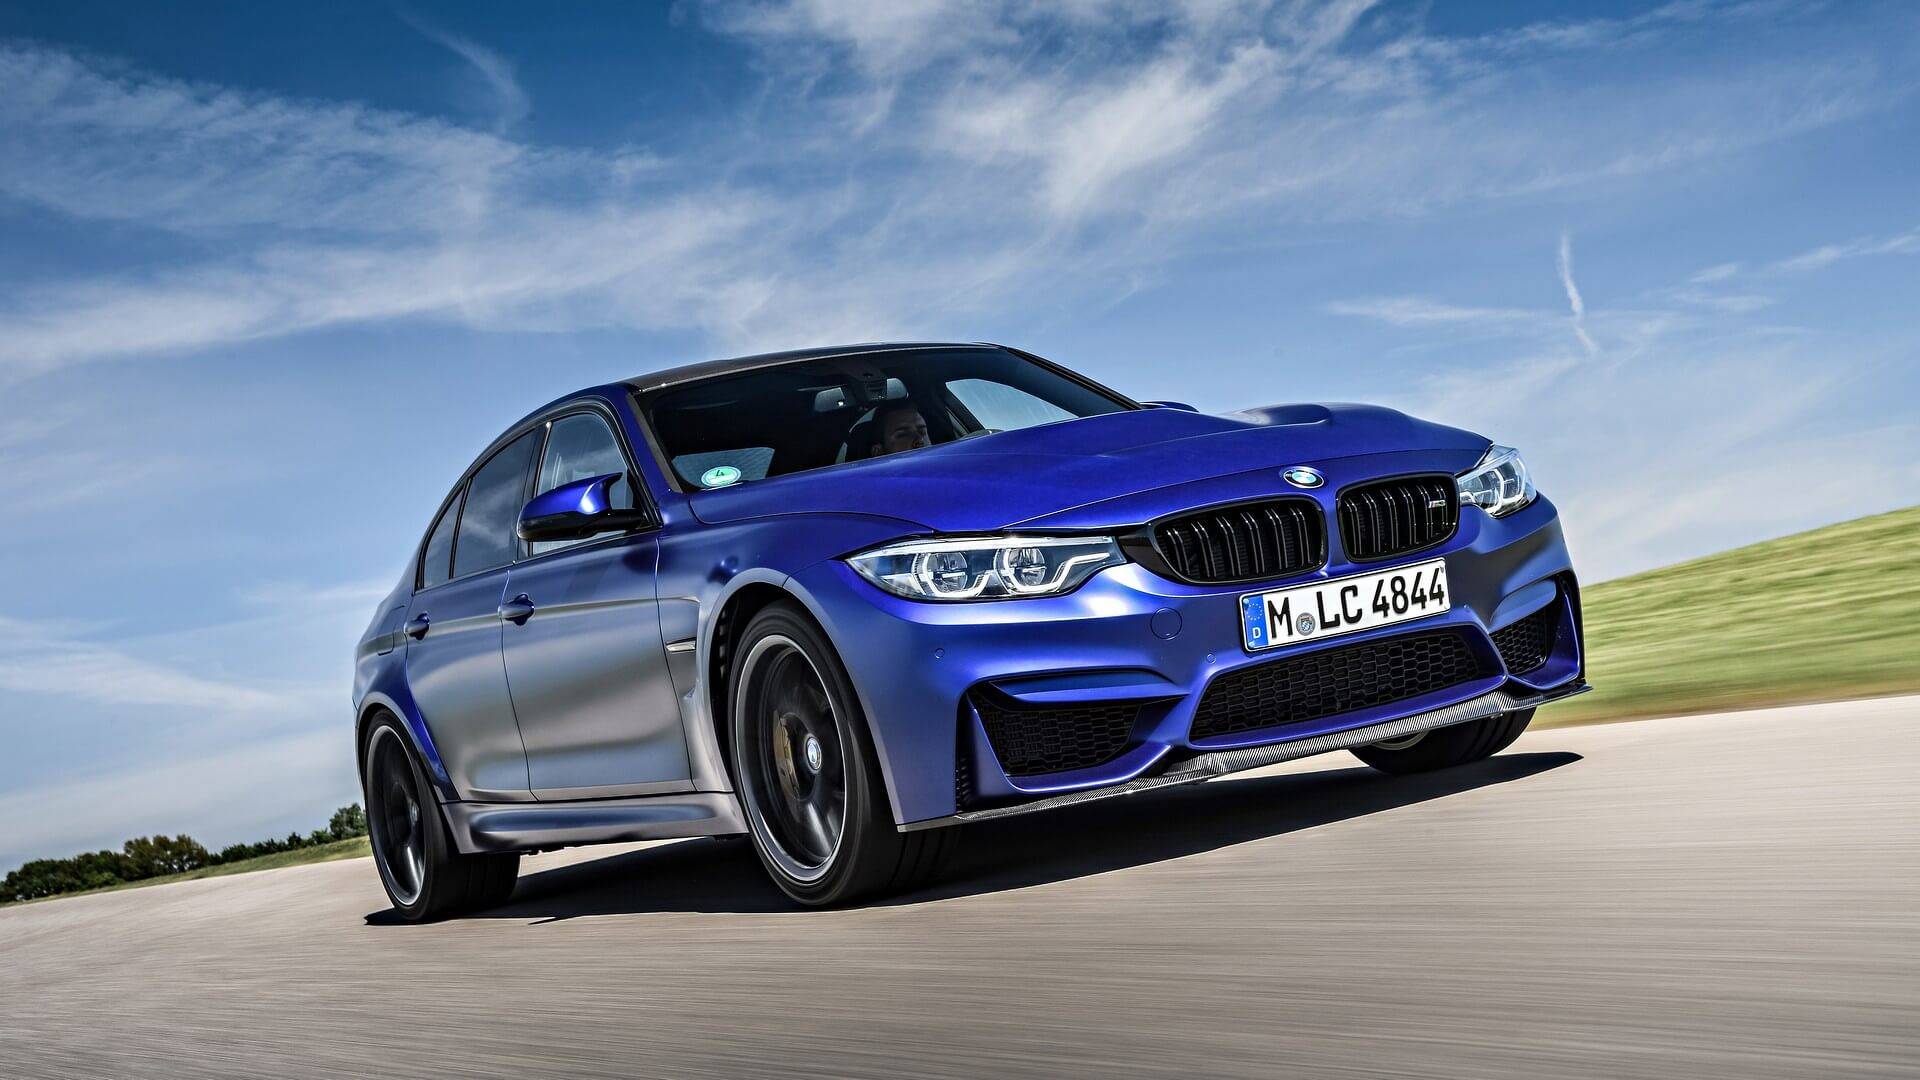 Witness The Greatness Of The BMW M3 CS In Nearly 100 Image